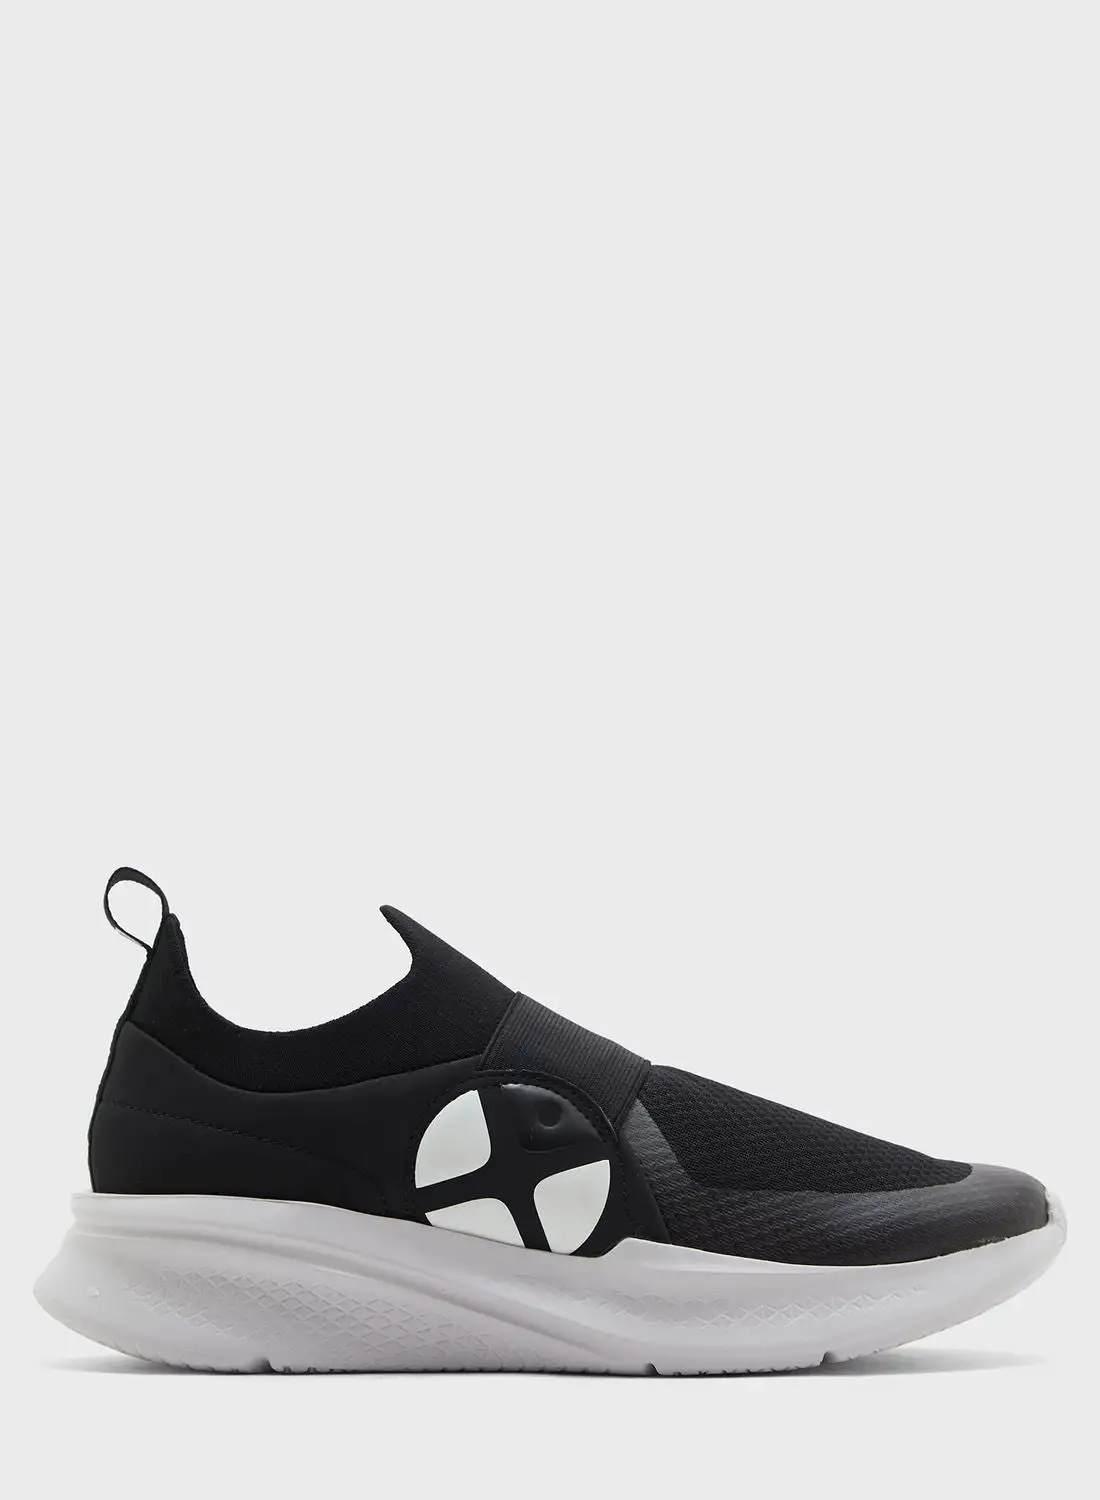 Hush Puppies Spark Slip On Sneakers